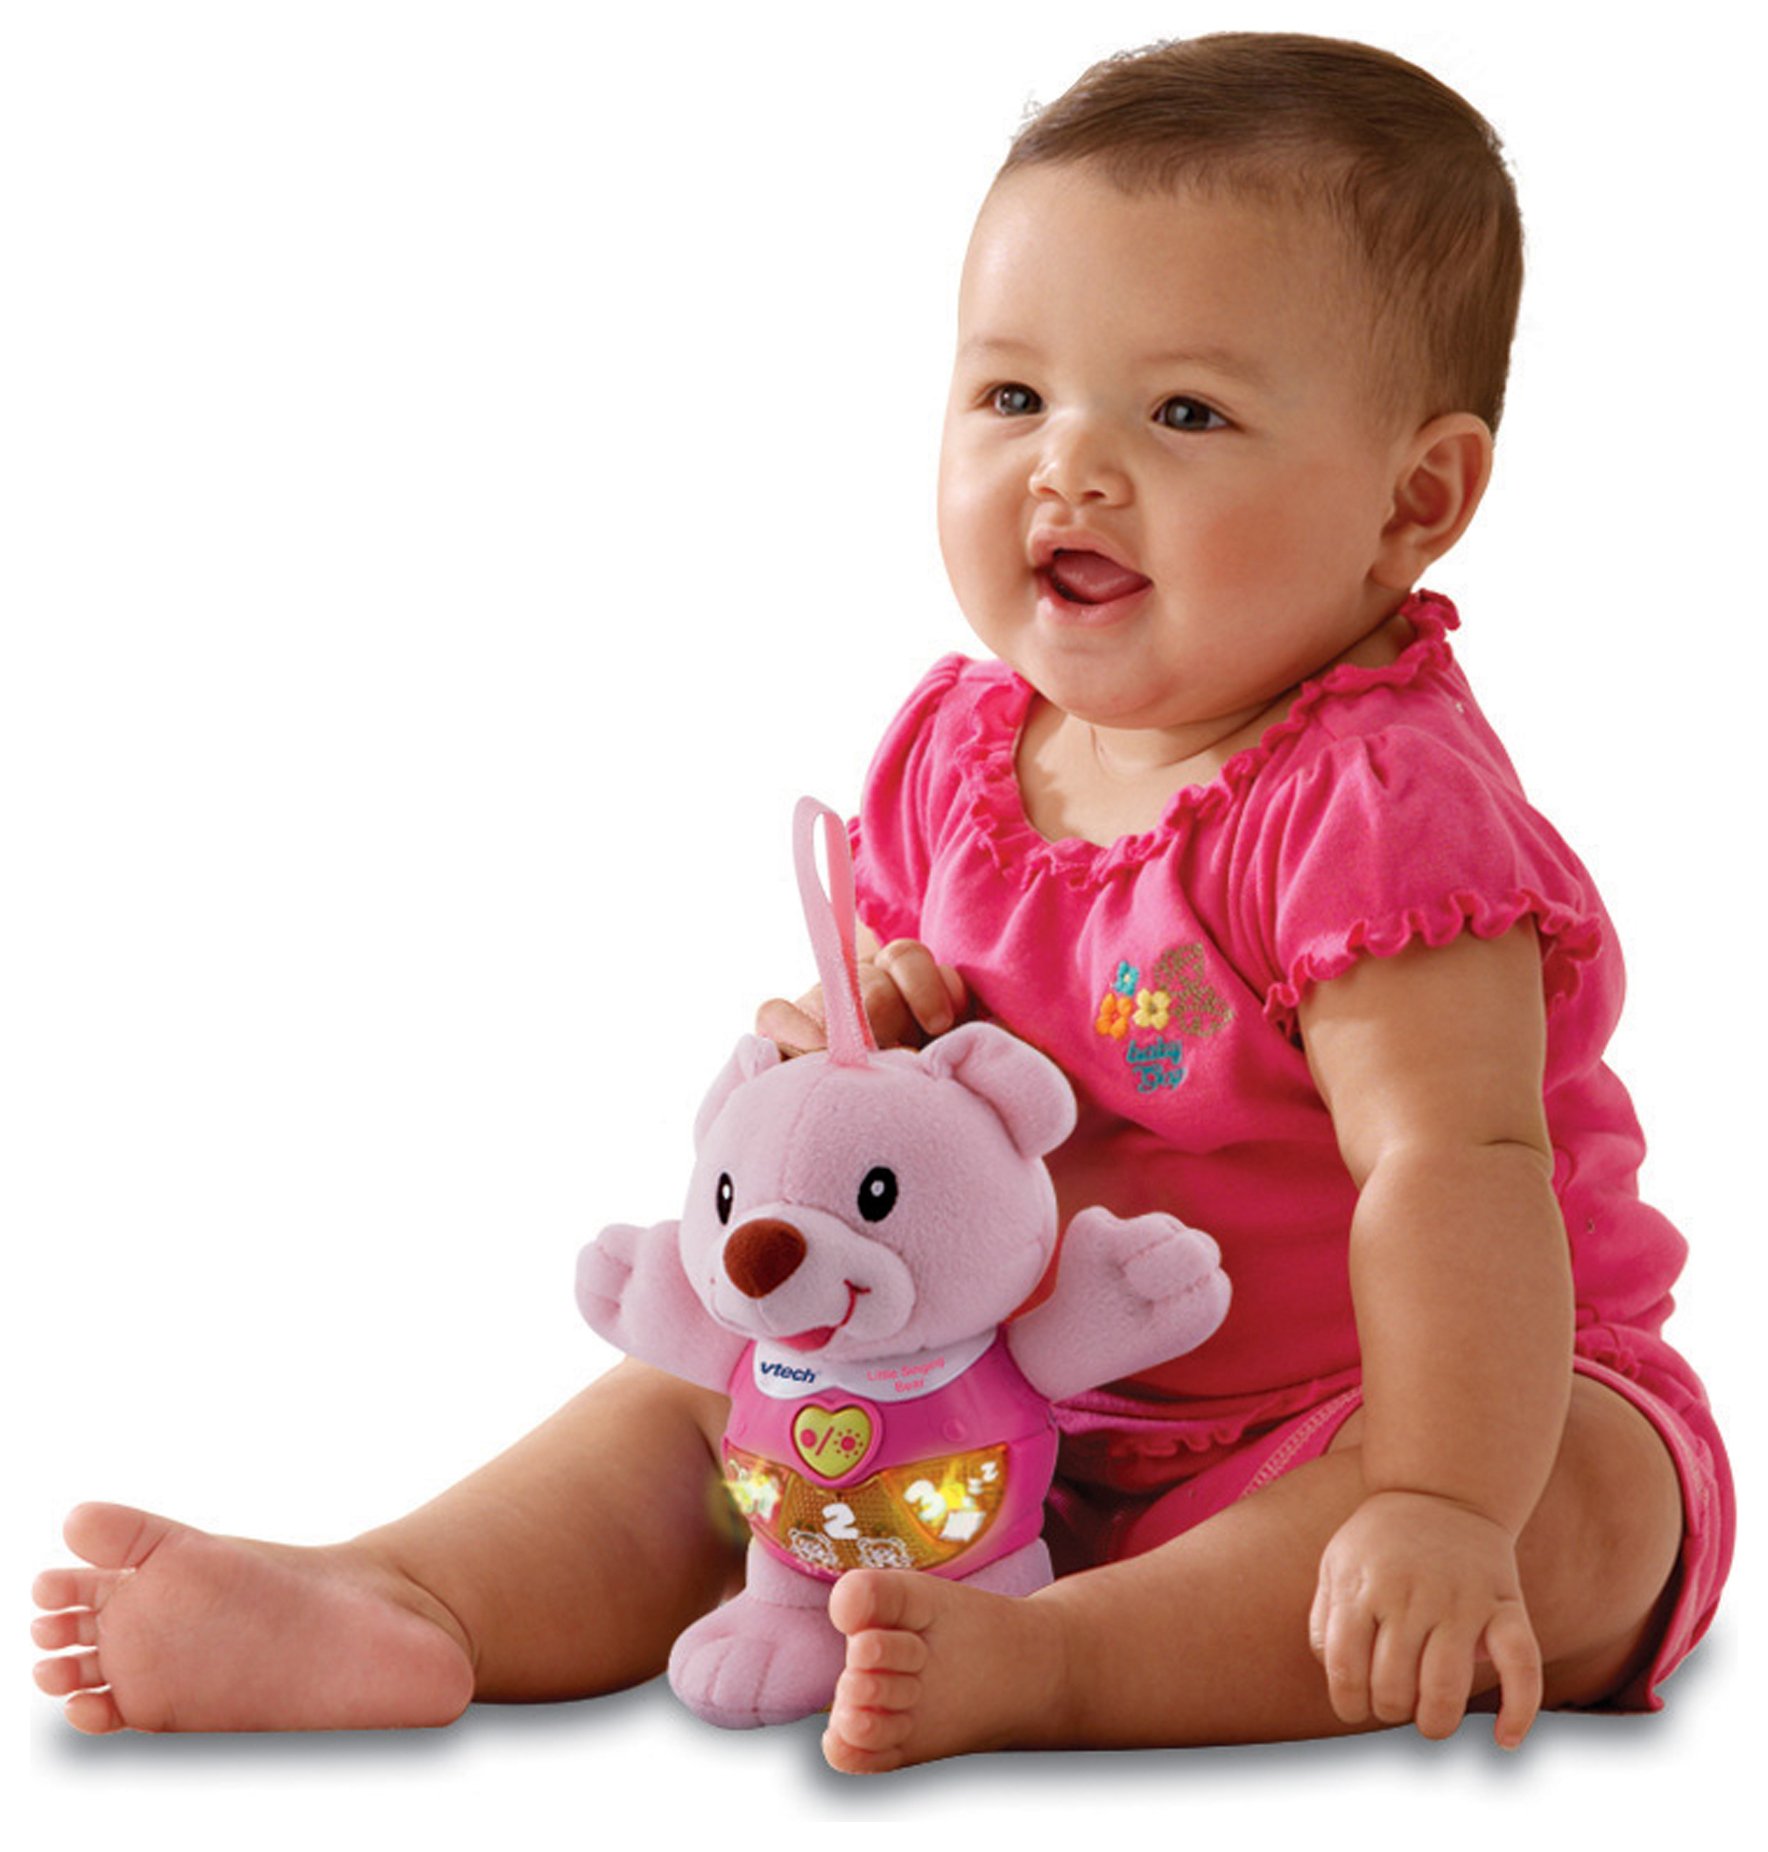 VTech My Friend Singing Alice Bear review